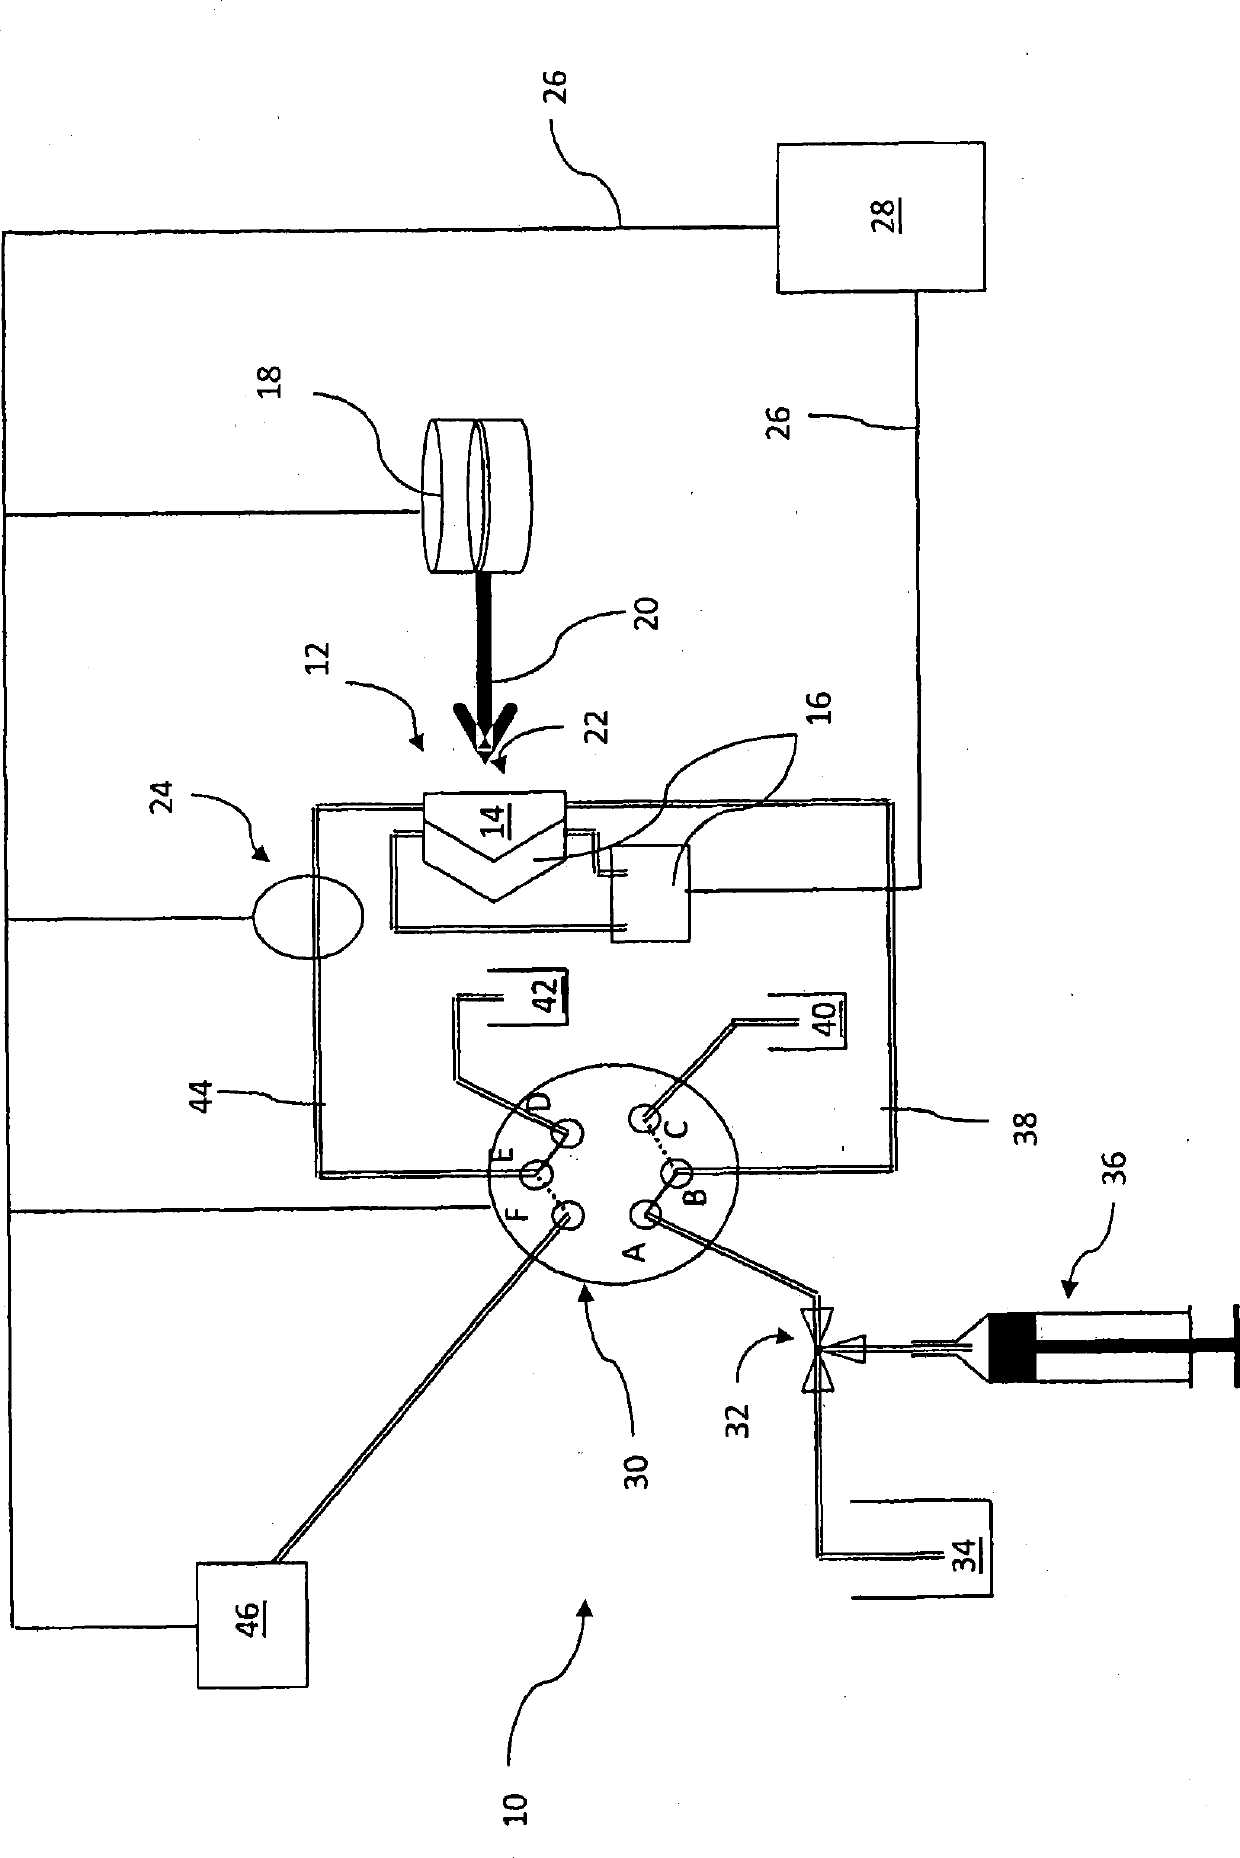 Process and installation for producing radioisotopes